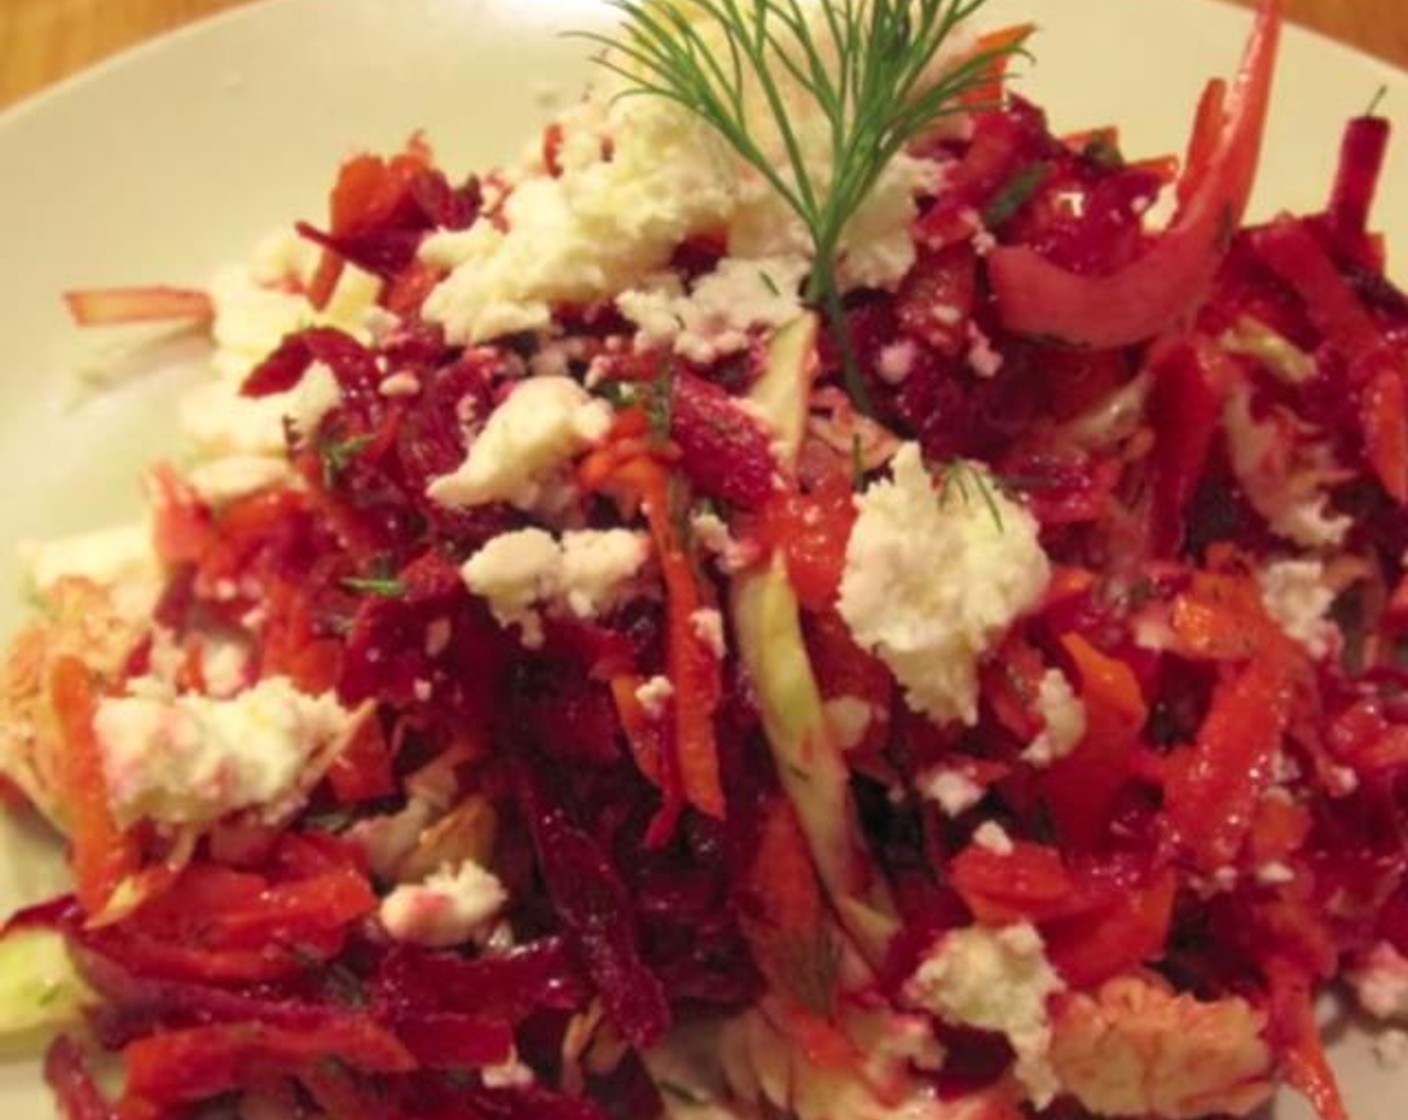 Beet and Carrot Slaw with Dill Dijon Dressing